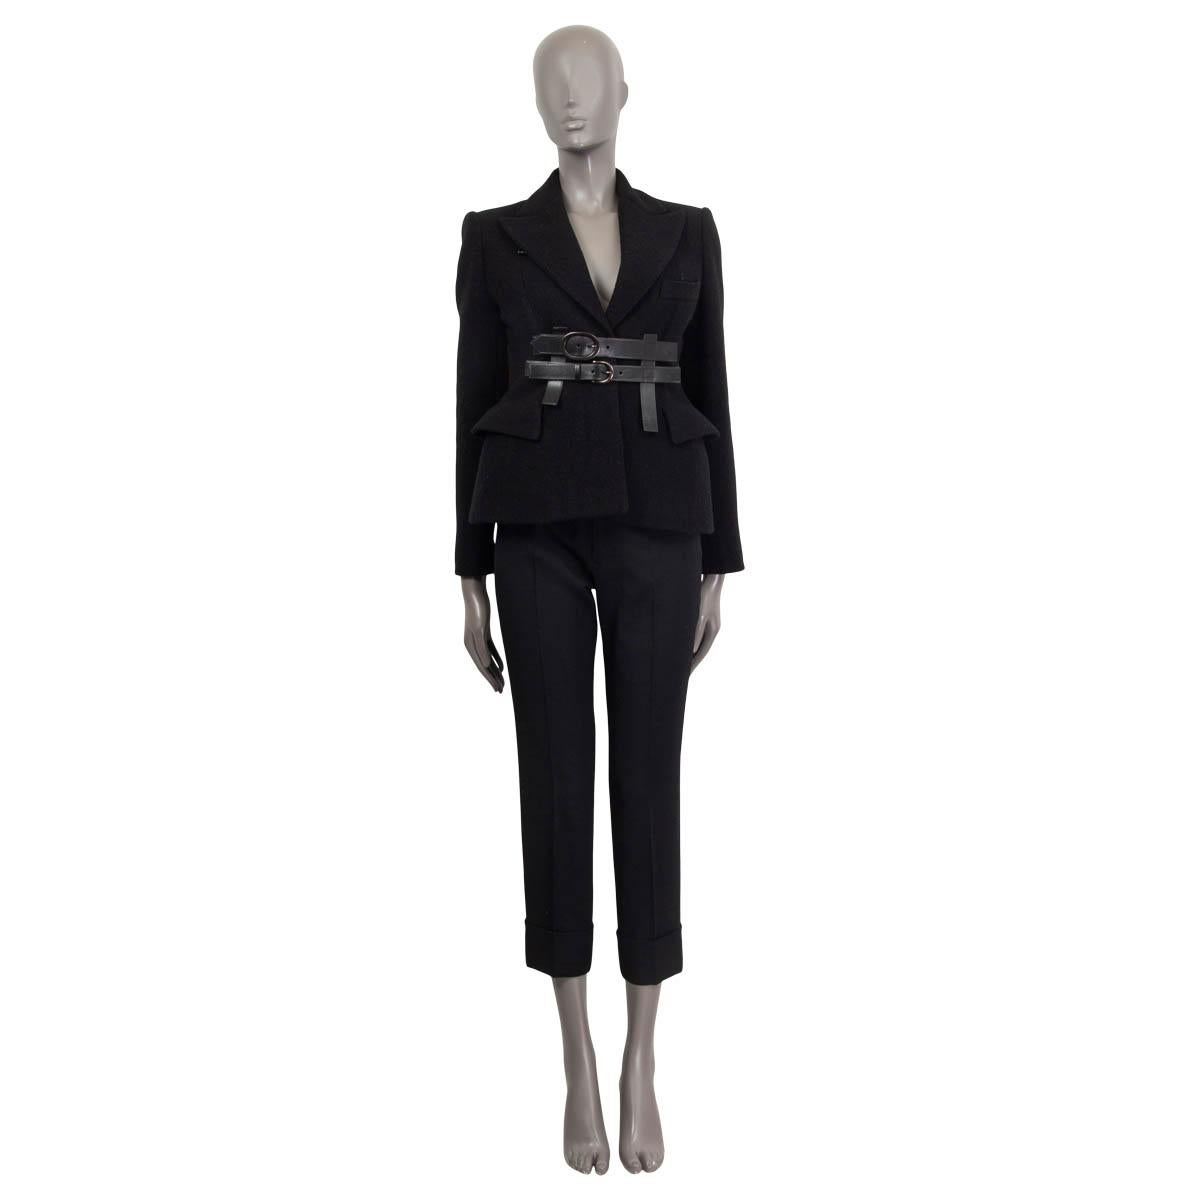 100% authentic Tom Ford belted blazer jacket in black boiled fleece wool (100%). Fall/winter 2016 collection. Features buttoned cuffs, two sewn shut flap pockets and one sewn shut slit pocket. Has a detachable belt at the waist, padded shoulders and